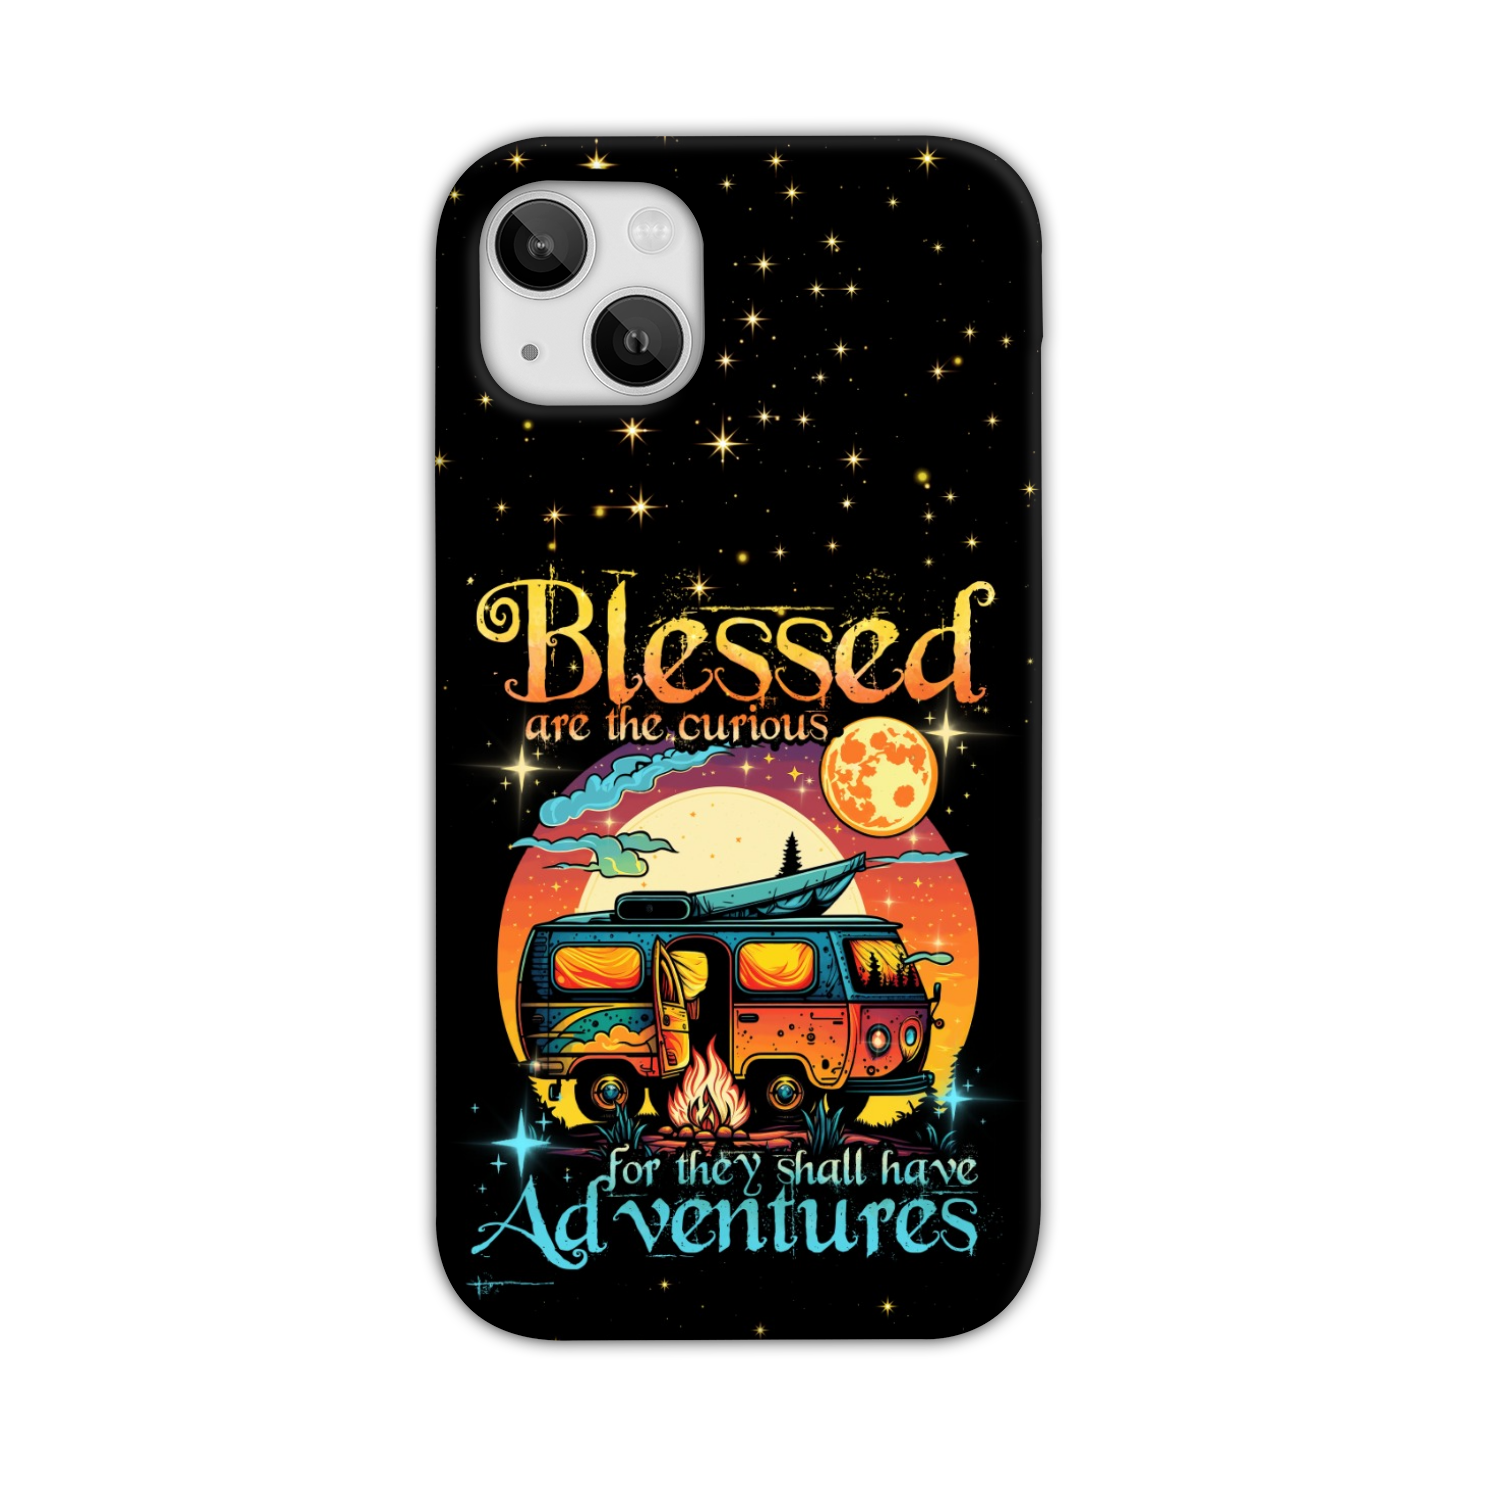 BLESSED ARE THE CURIOUS FOR THEY SHALL HAVE ADVENTURES PHONE CASE - TYTD2504233